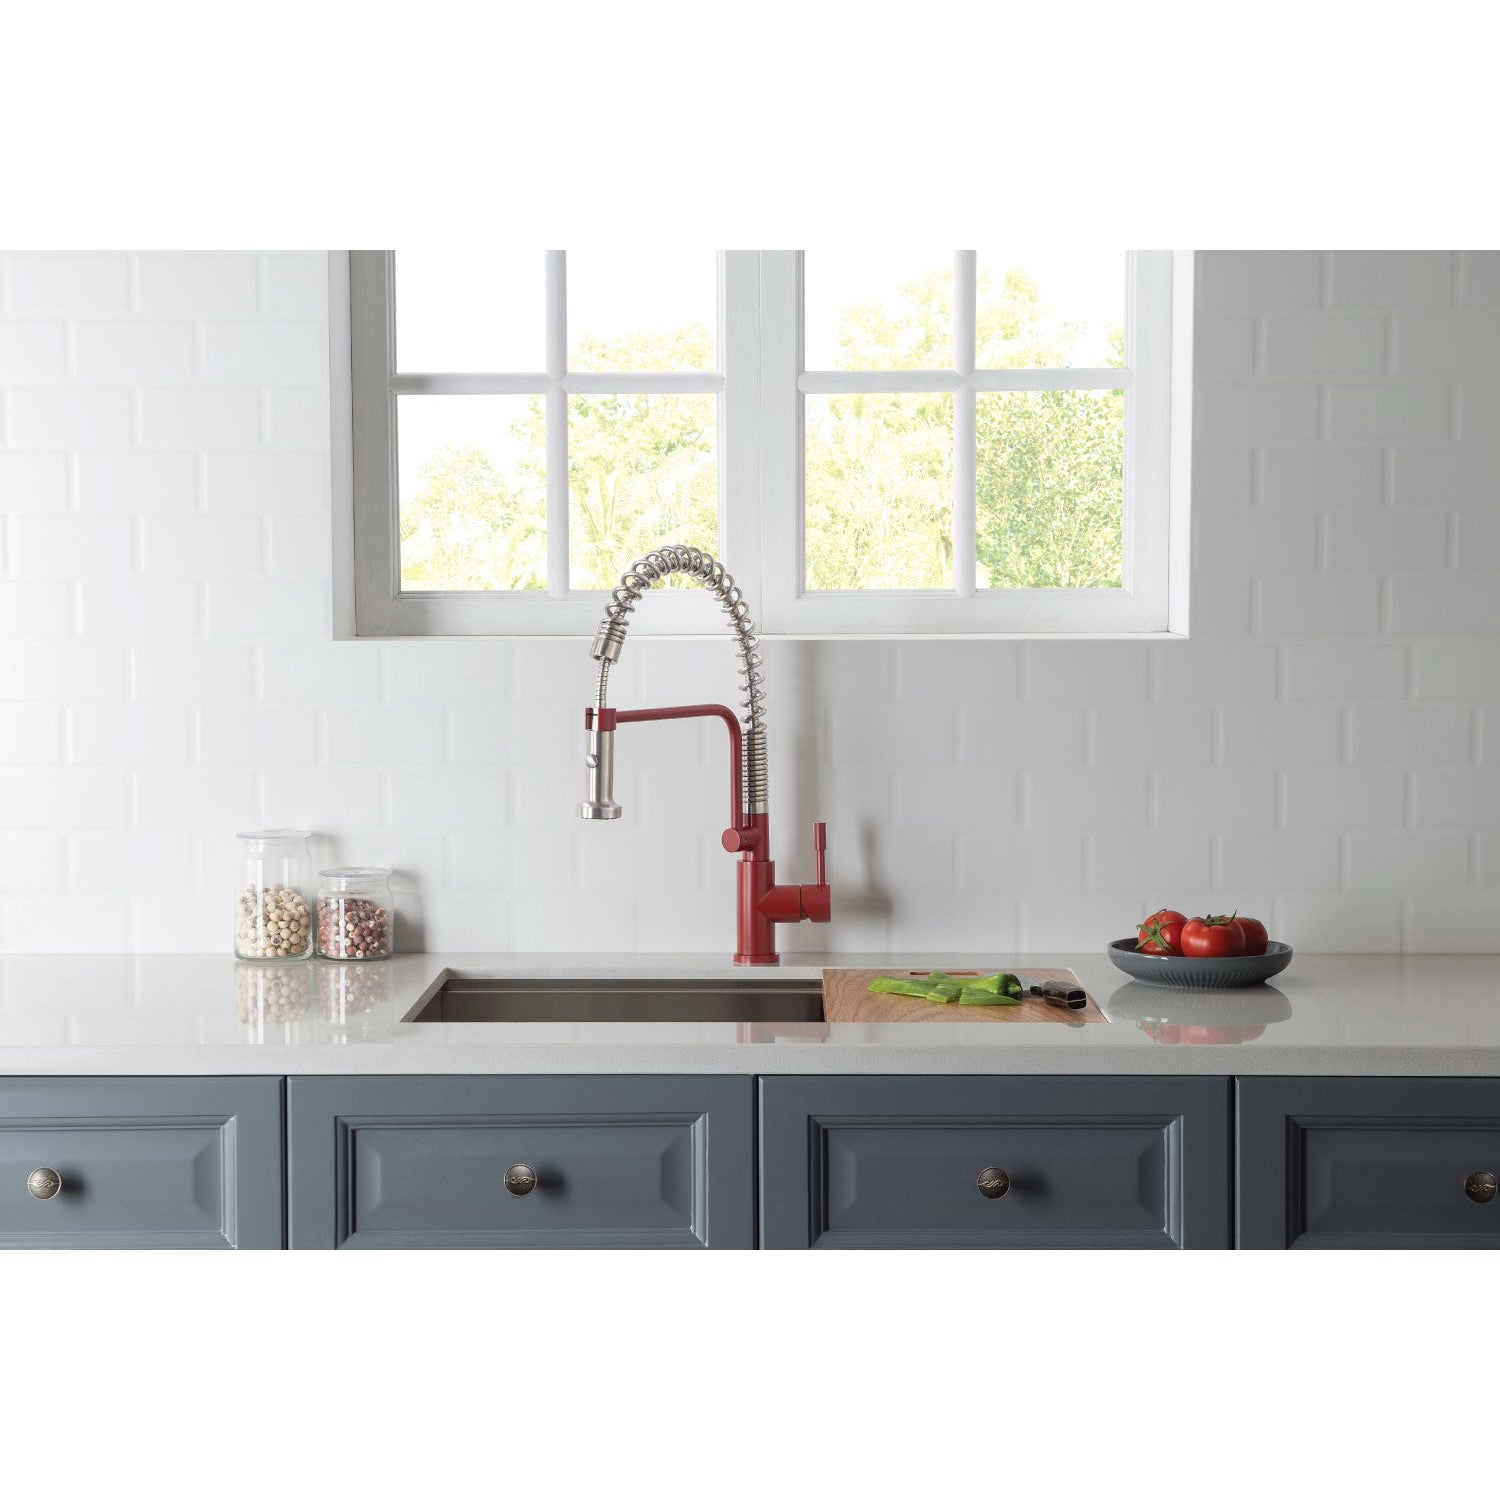 Isenberg Klassiker Caso 19" Matte Black Semi-Professional Stainless Steel Pull-Down Kitchen Faucet With Dual Function Sprayer